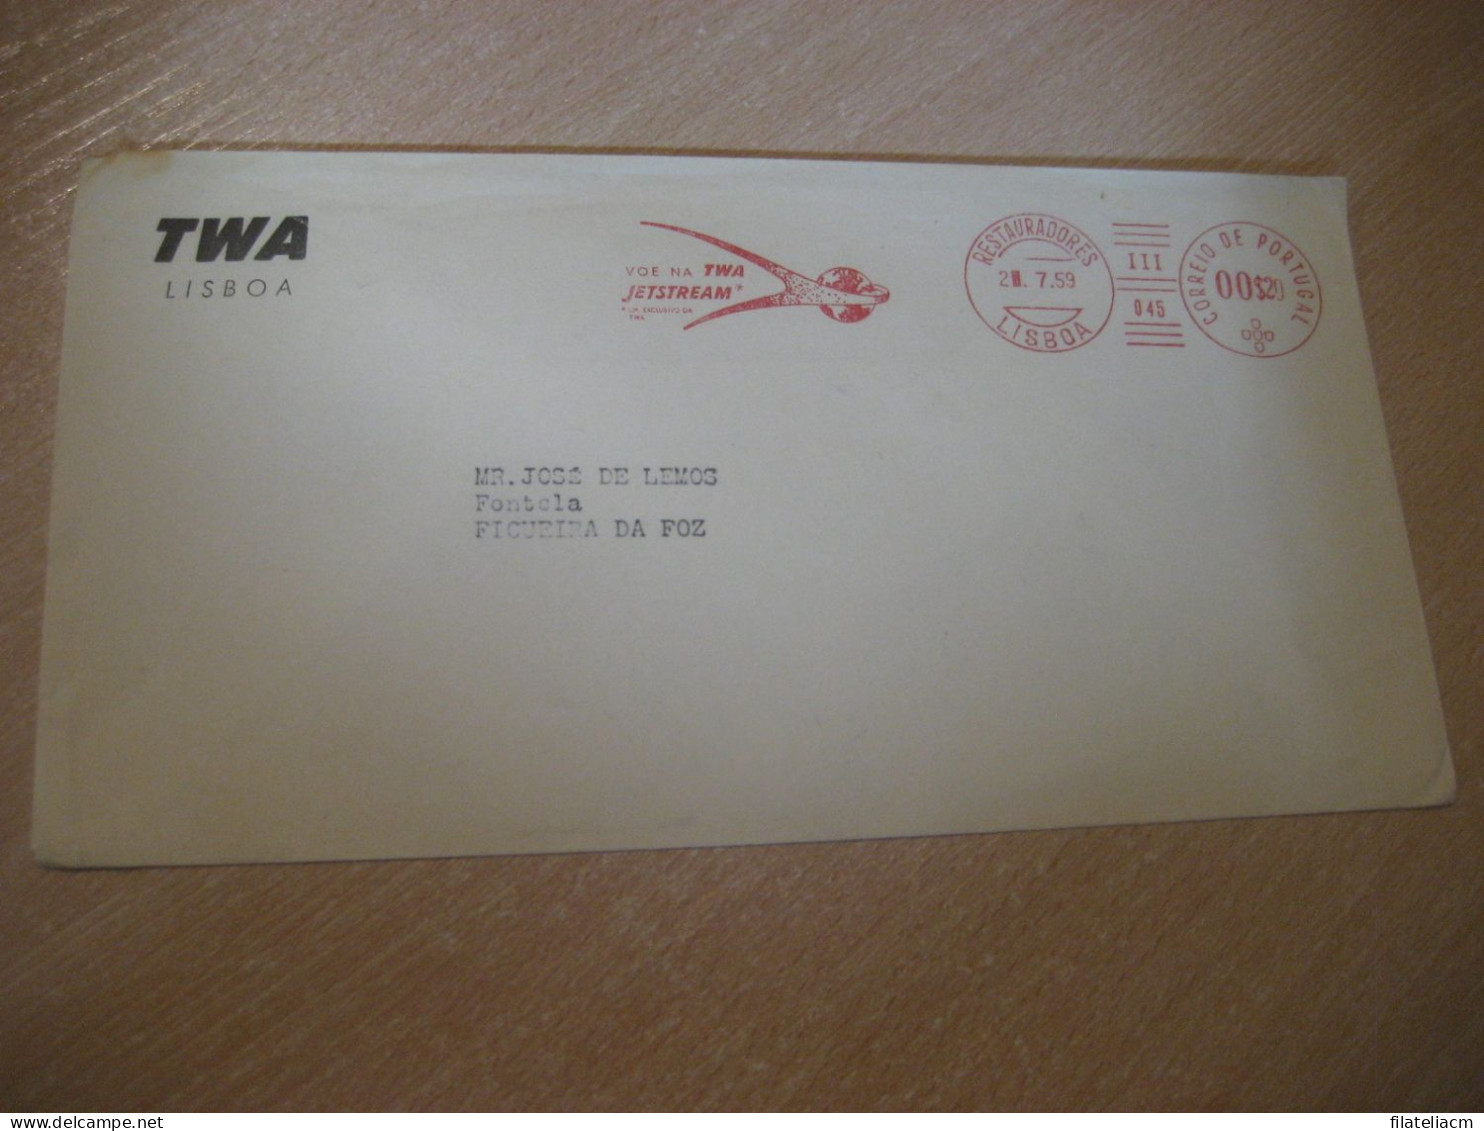 LISBOA 1959 To Figueira Da Foz TWA Jetstream Airline Trans World Airlines Flight Meter Mail Cancel Cover PORTUGAL - Lettres & Documents